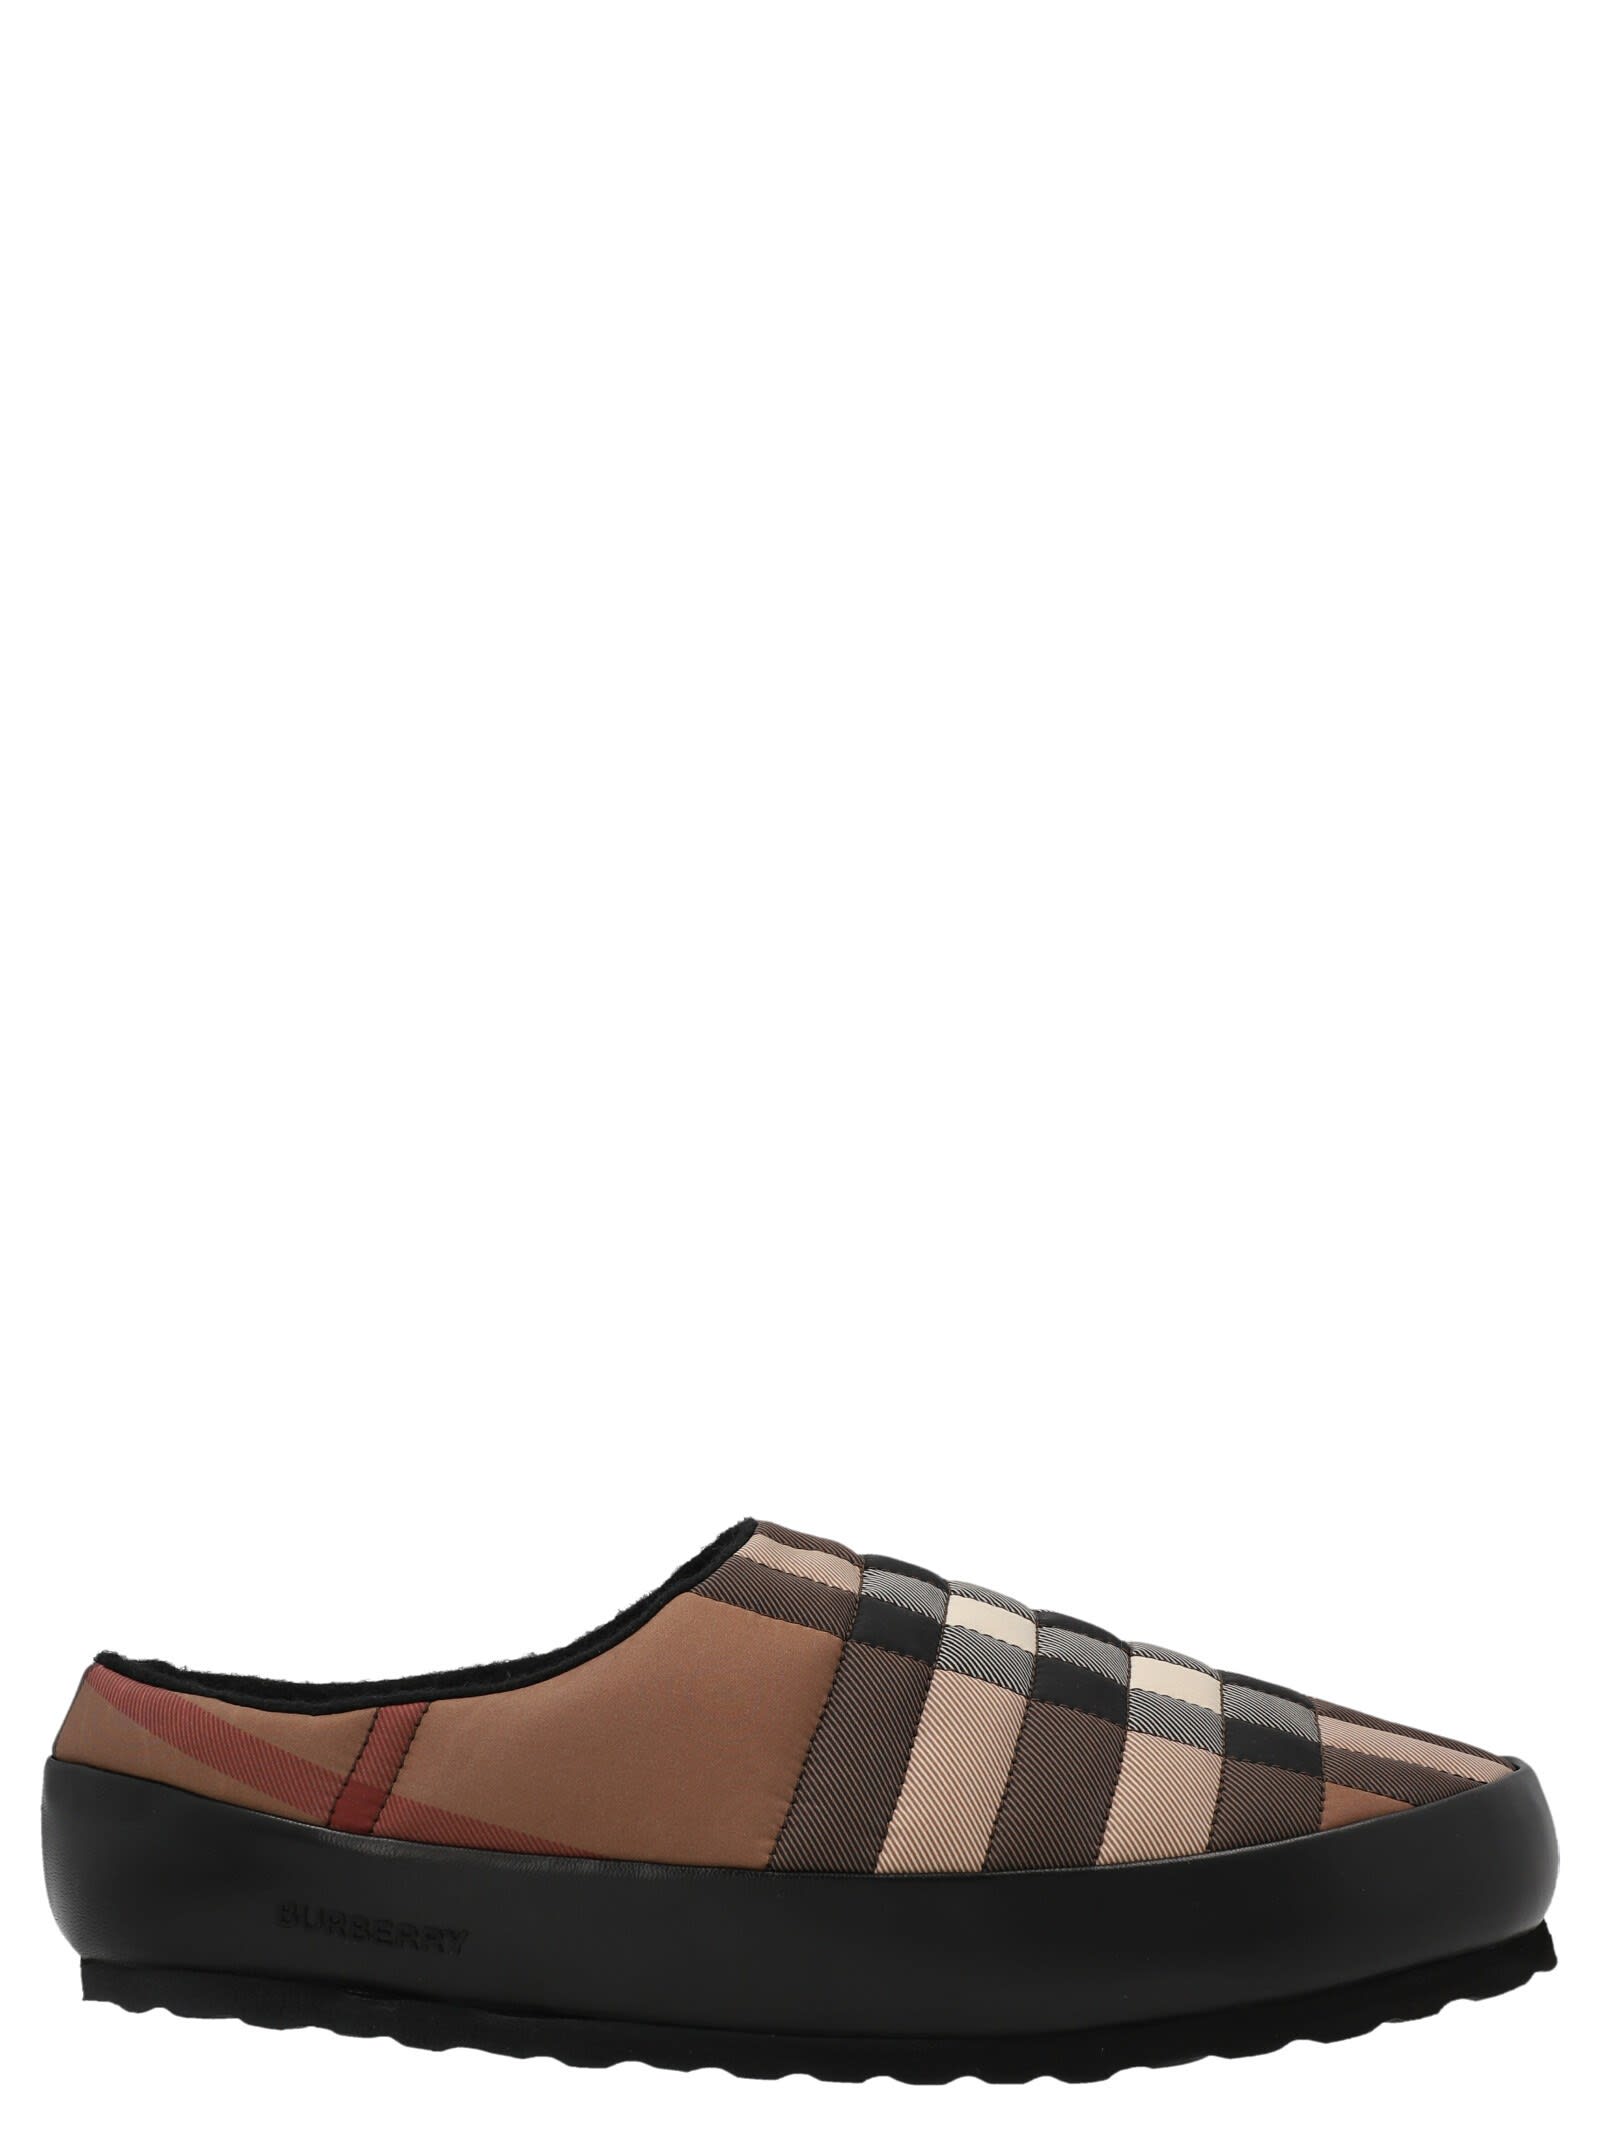 Easy Elegance: Discover Burberry Slip-On Shoes